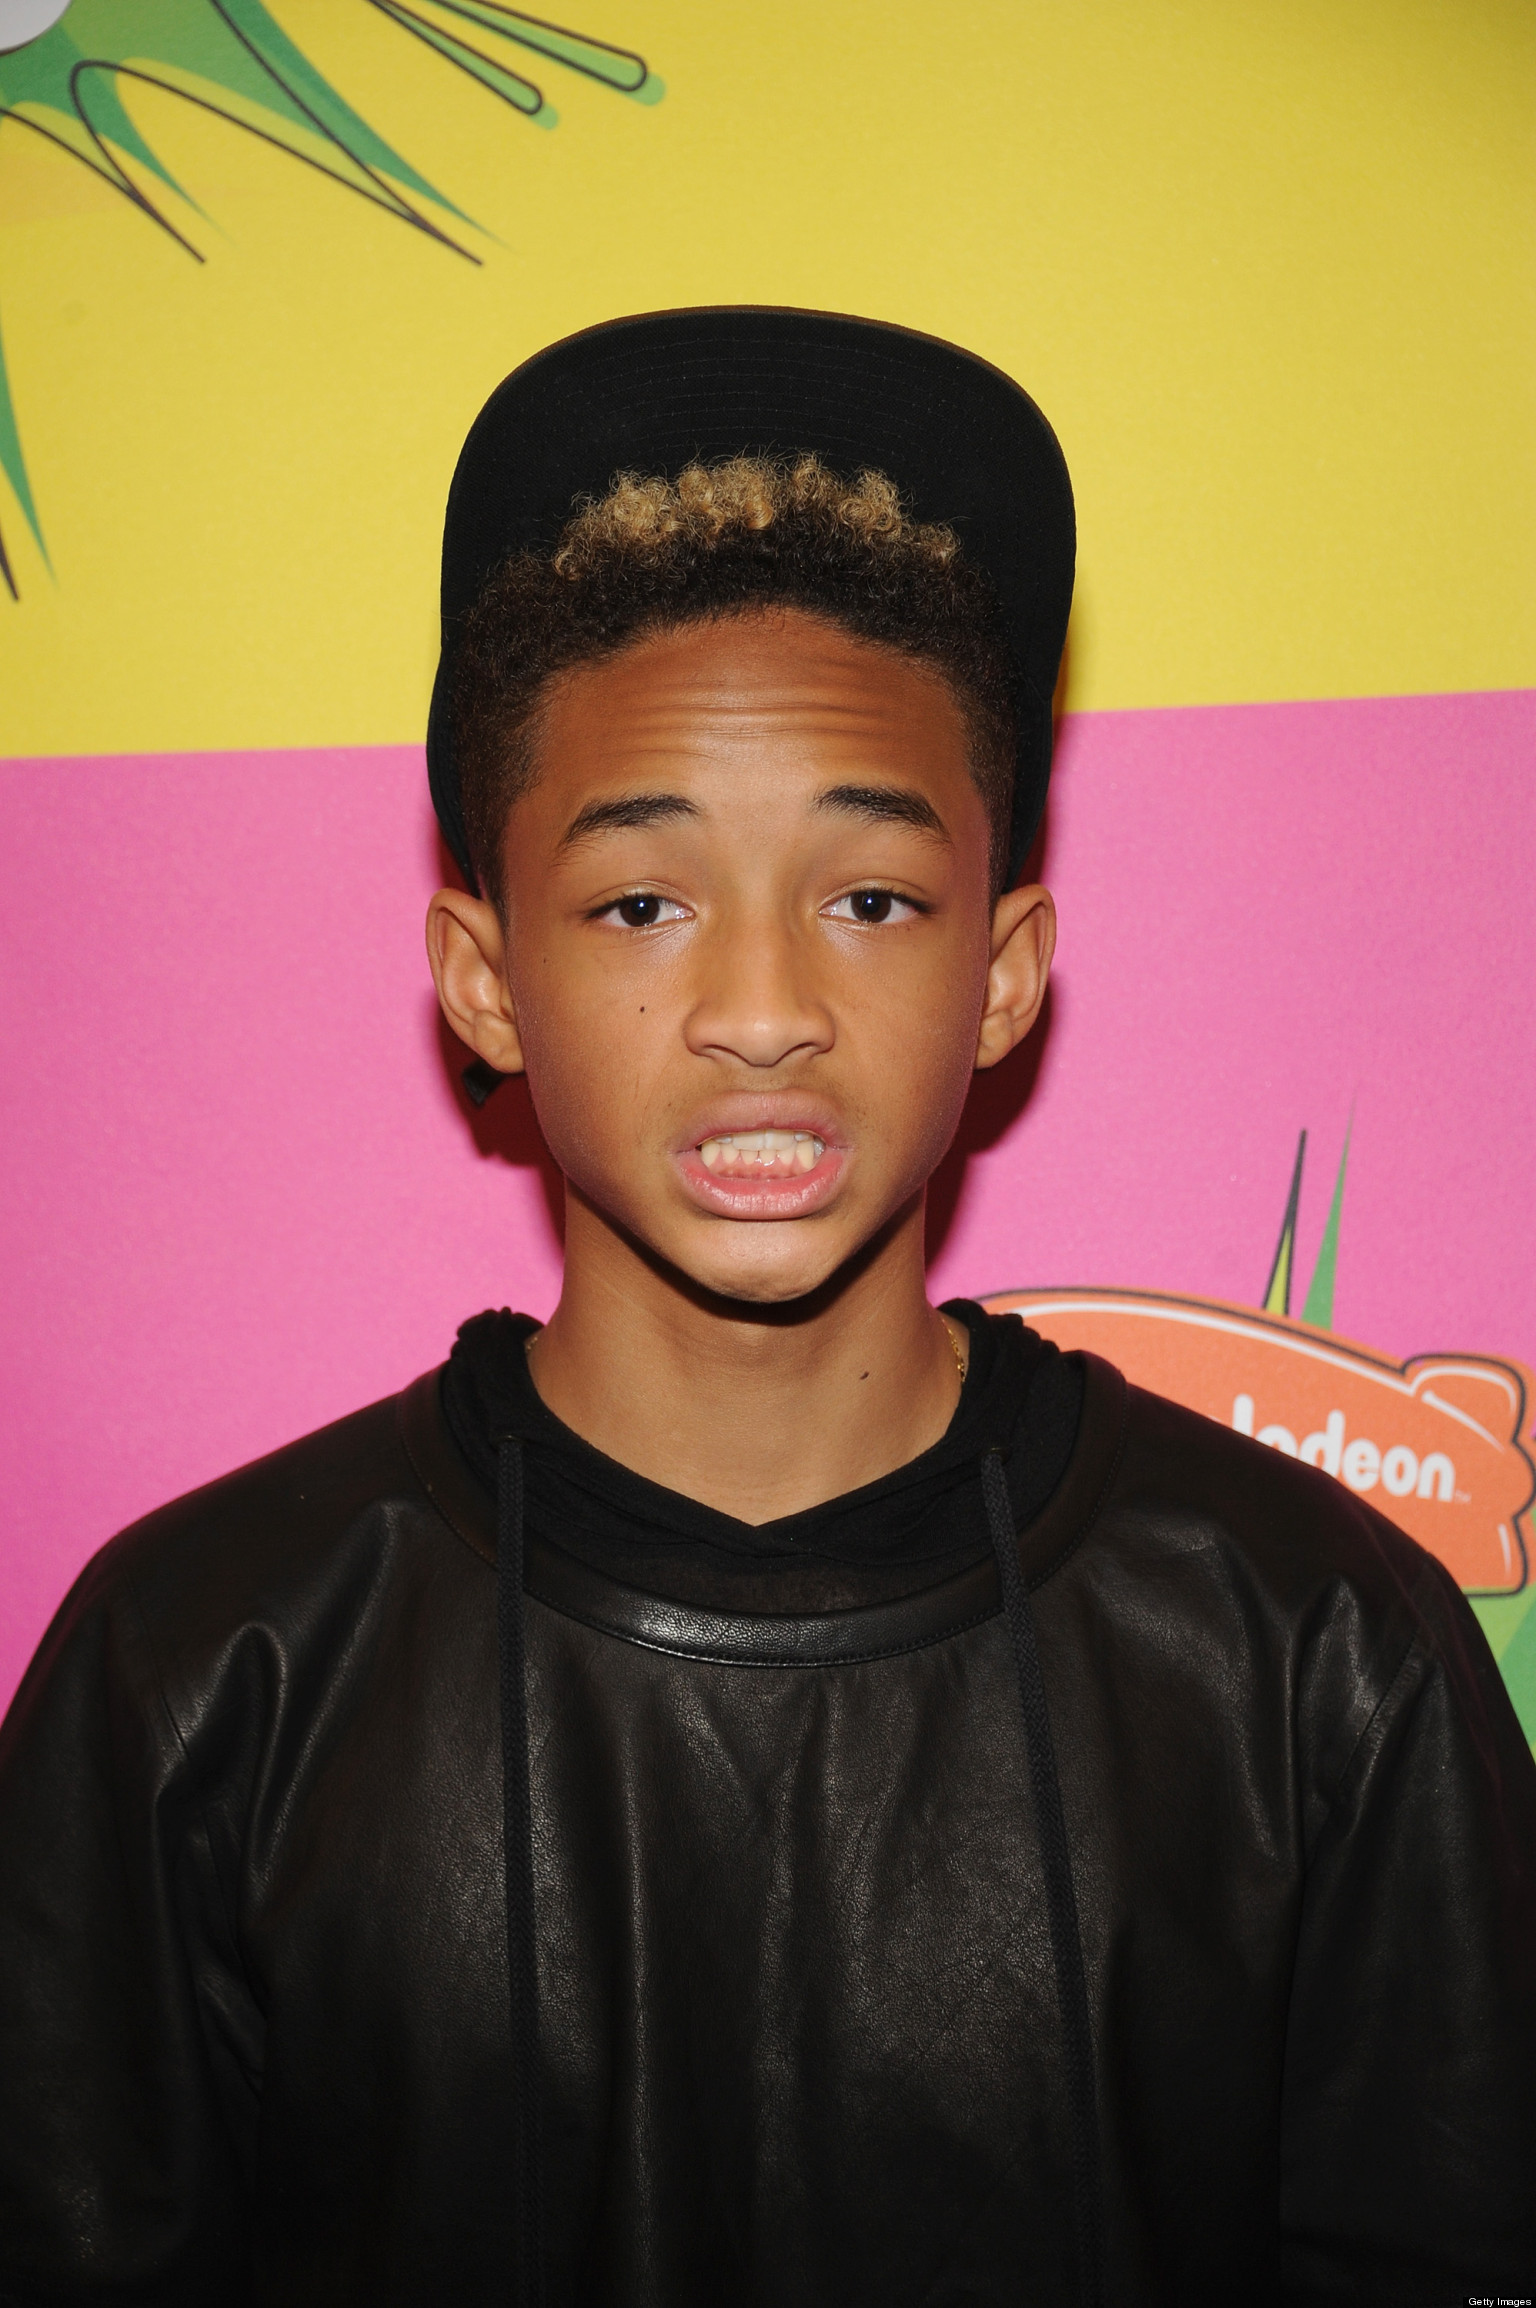 Jaden Smith Wallpapers High Quality | Download Free